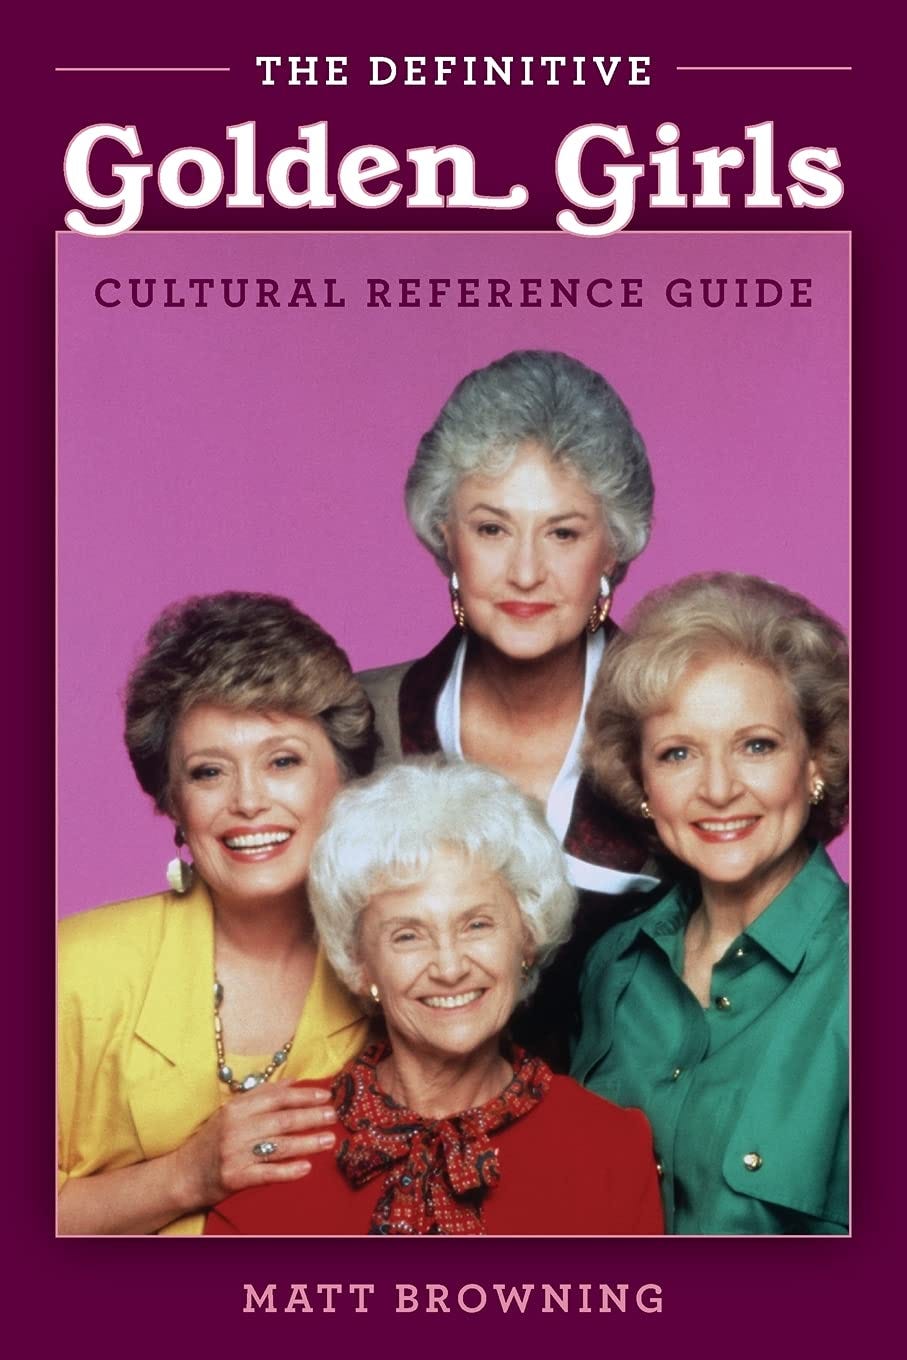 The Definitive &quot;Golden Girls&quot; Cultural Reference Guide: Browning, Matt:  9781493060351: Amazon.com: Books